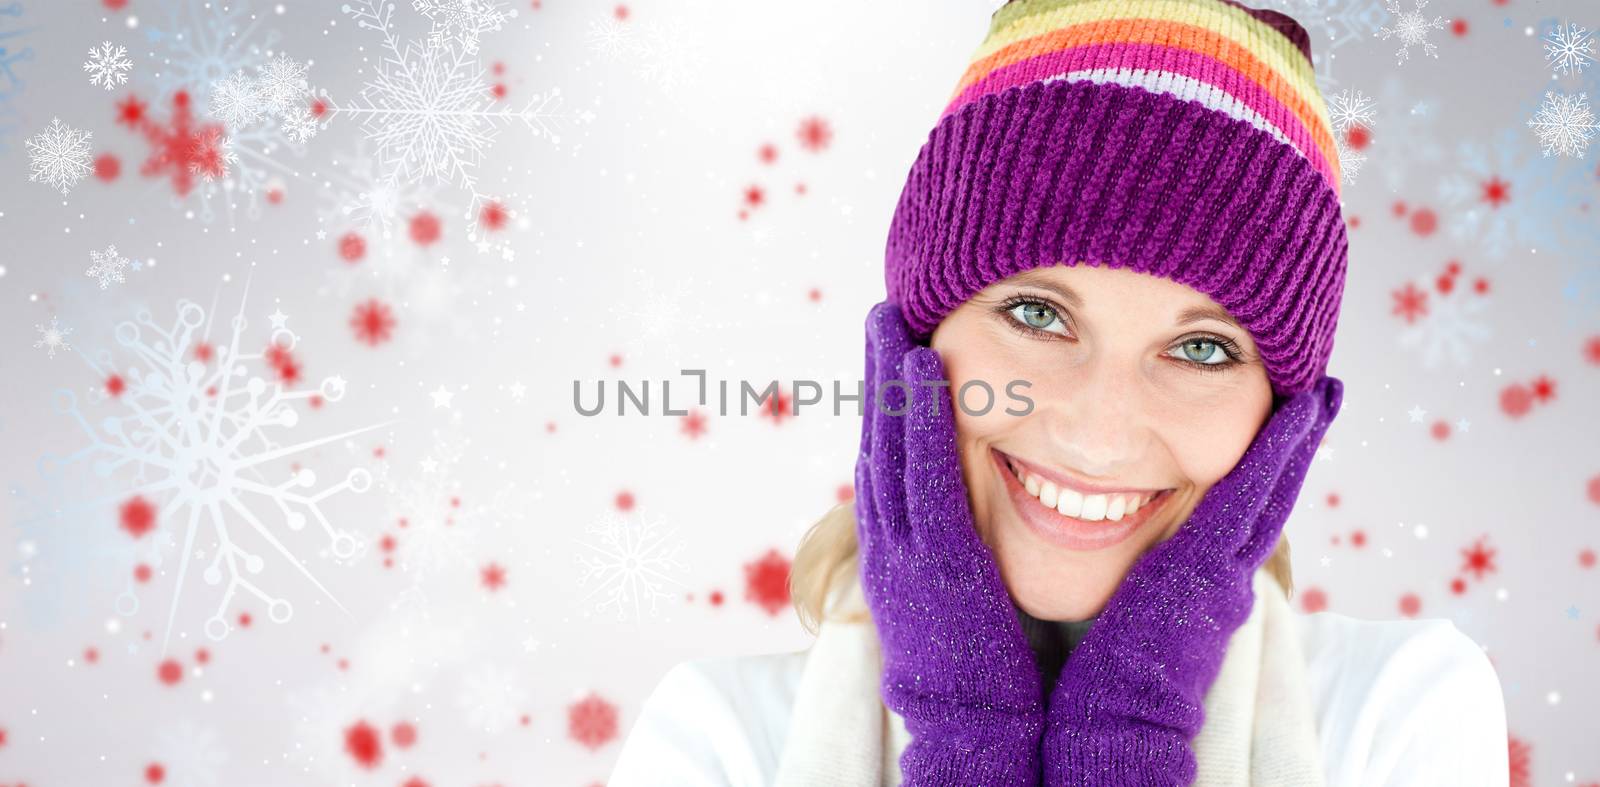 Radiant young woman with cap and gloves in the winter against snowflake pattern